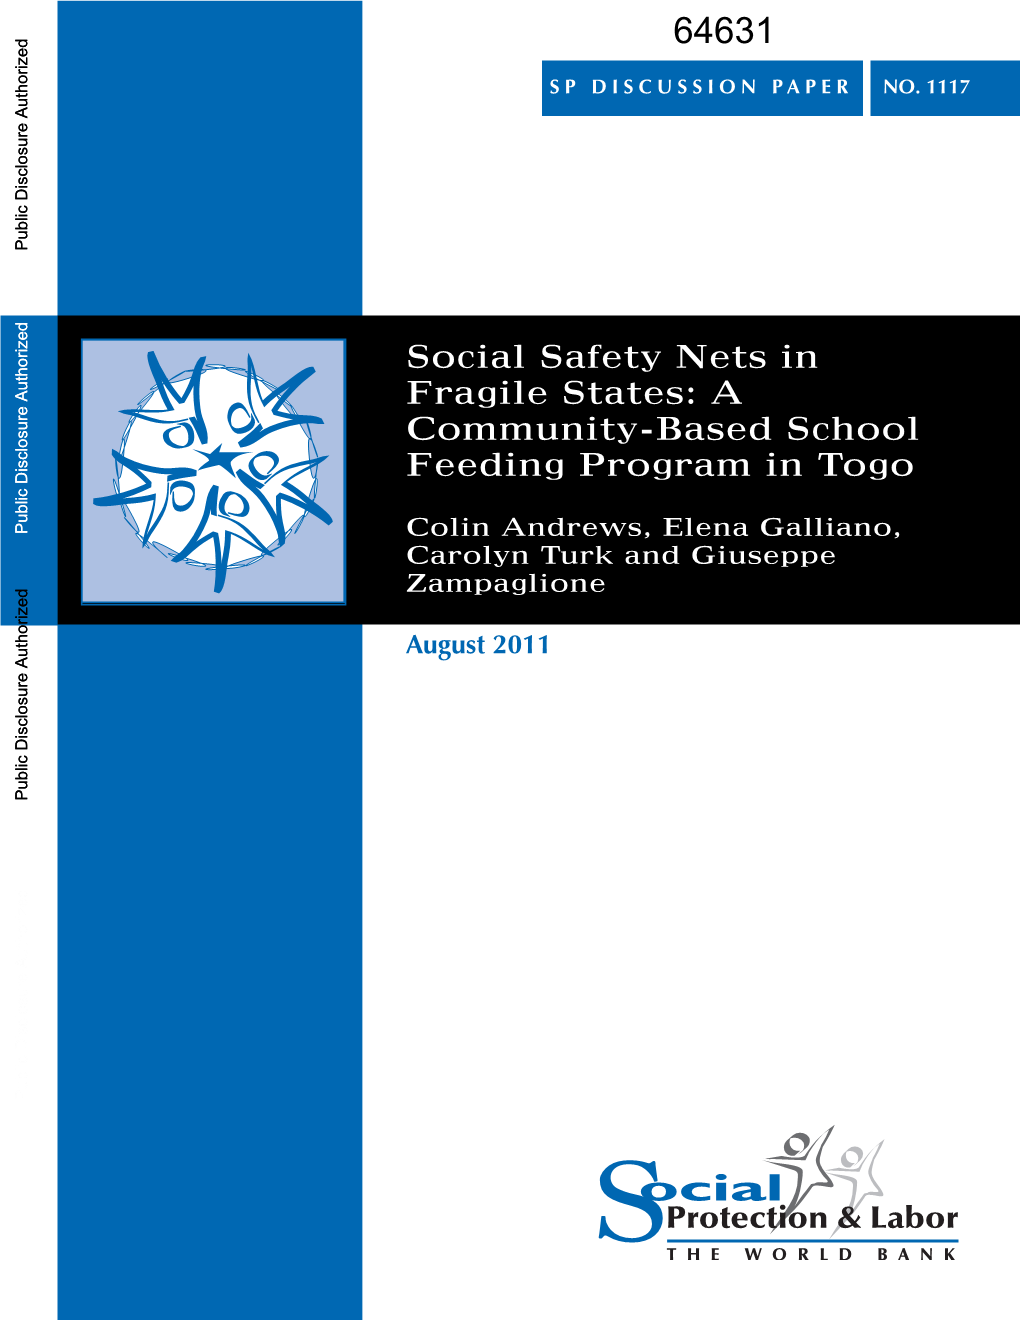 V. the Community-Based School Feeding Program As a Safety Net: a Model for Fragile, Food Insecure States